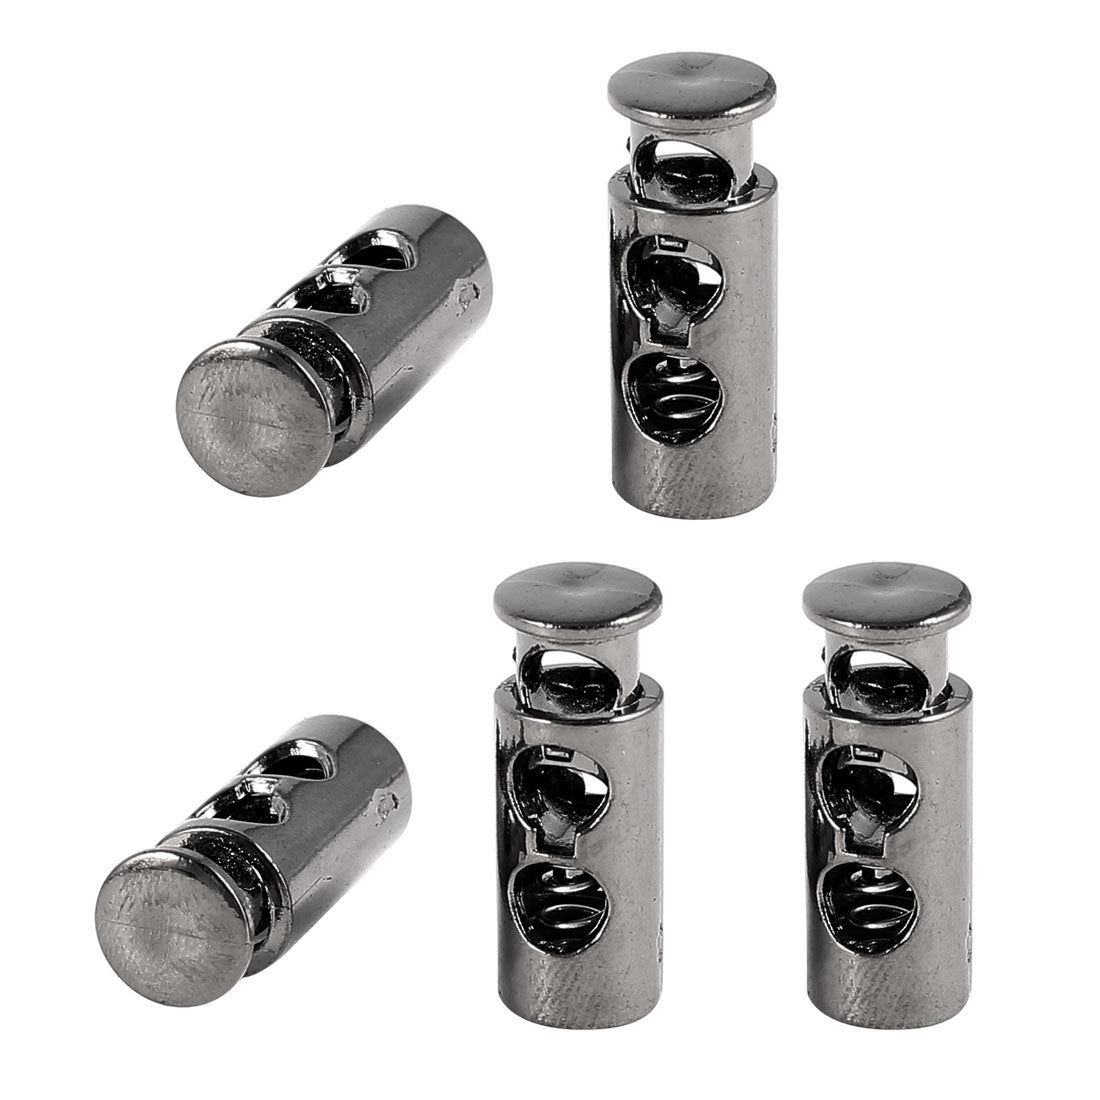 uxcell Uxcell 5pcs Black Plastic 4.5mm Dia Double Hole Cylinder Spring Cord Lock Stopper Adjuster